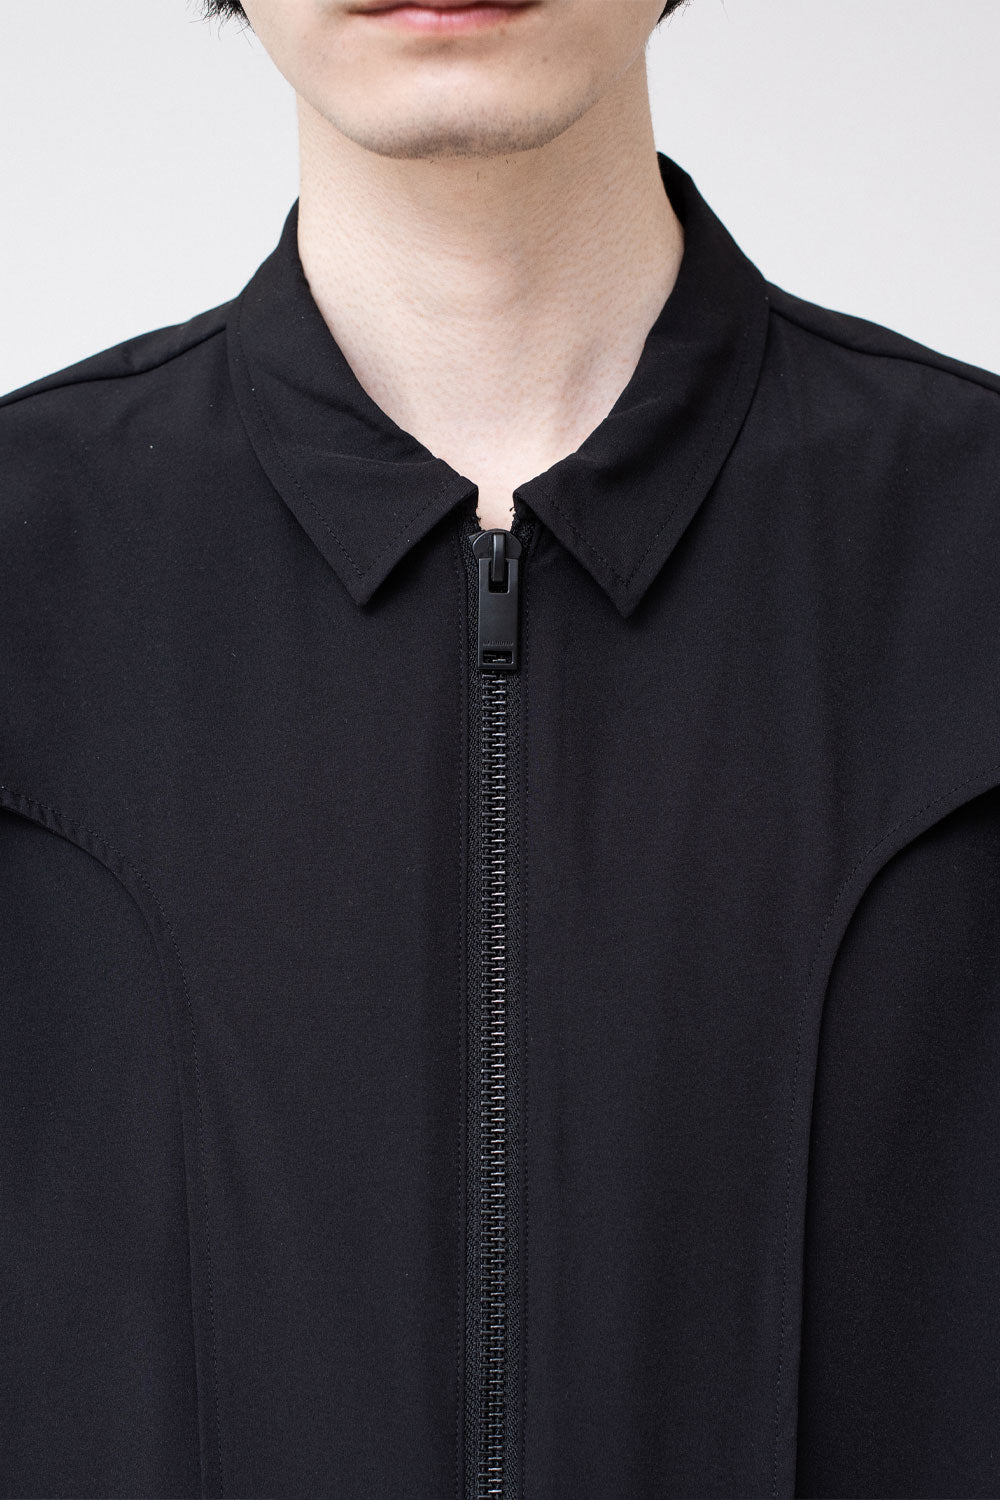 Buy the Han Kjobenhavn Washed Technical Zip S/S Shirt in Black at Intro. Spend £50 for free UK delivery. Official stockists. We ship worldwide.